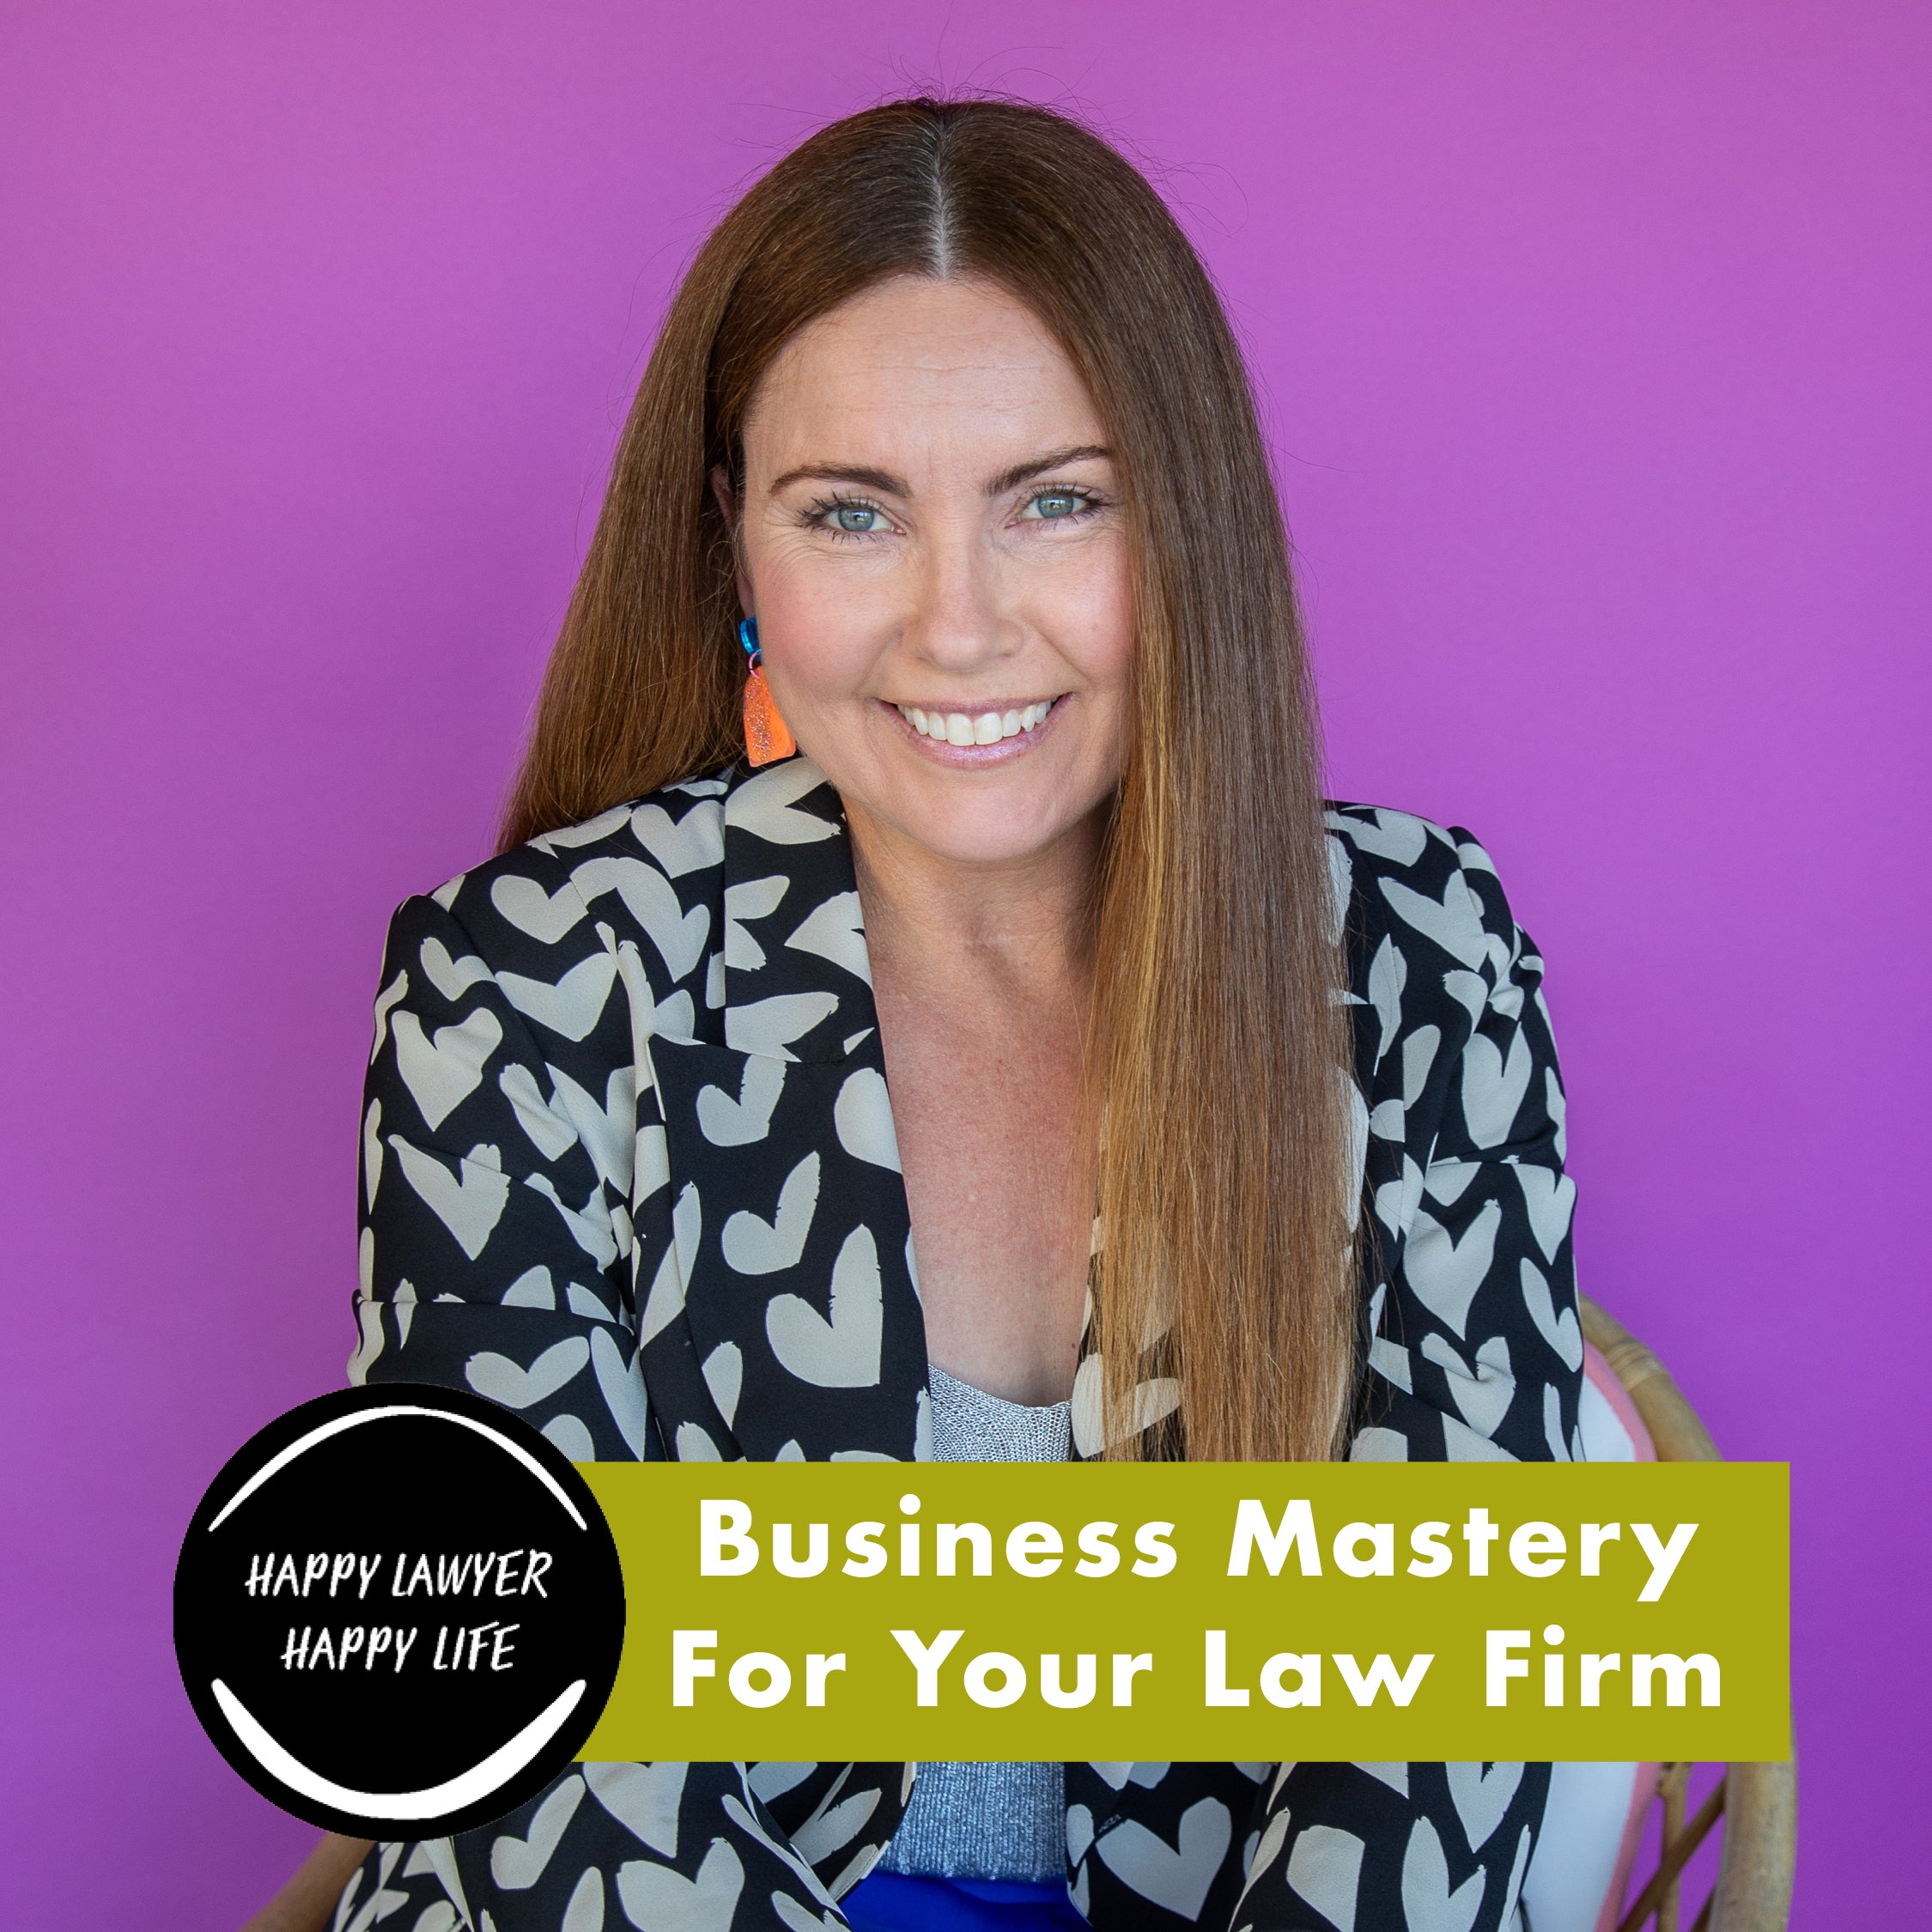 Business Mastery for your Law Firm